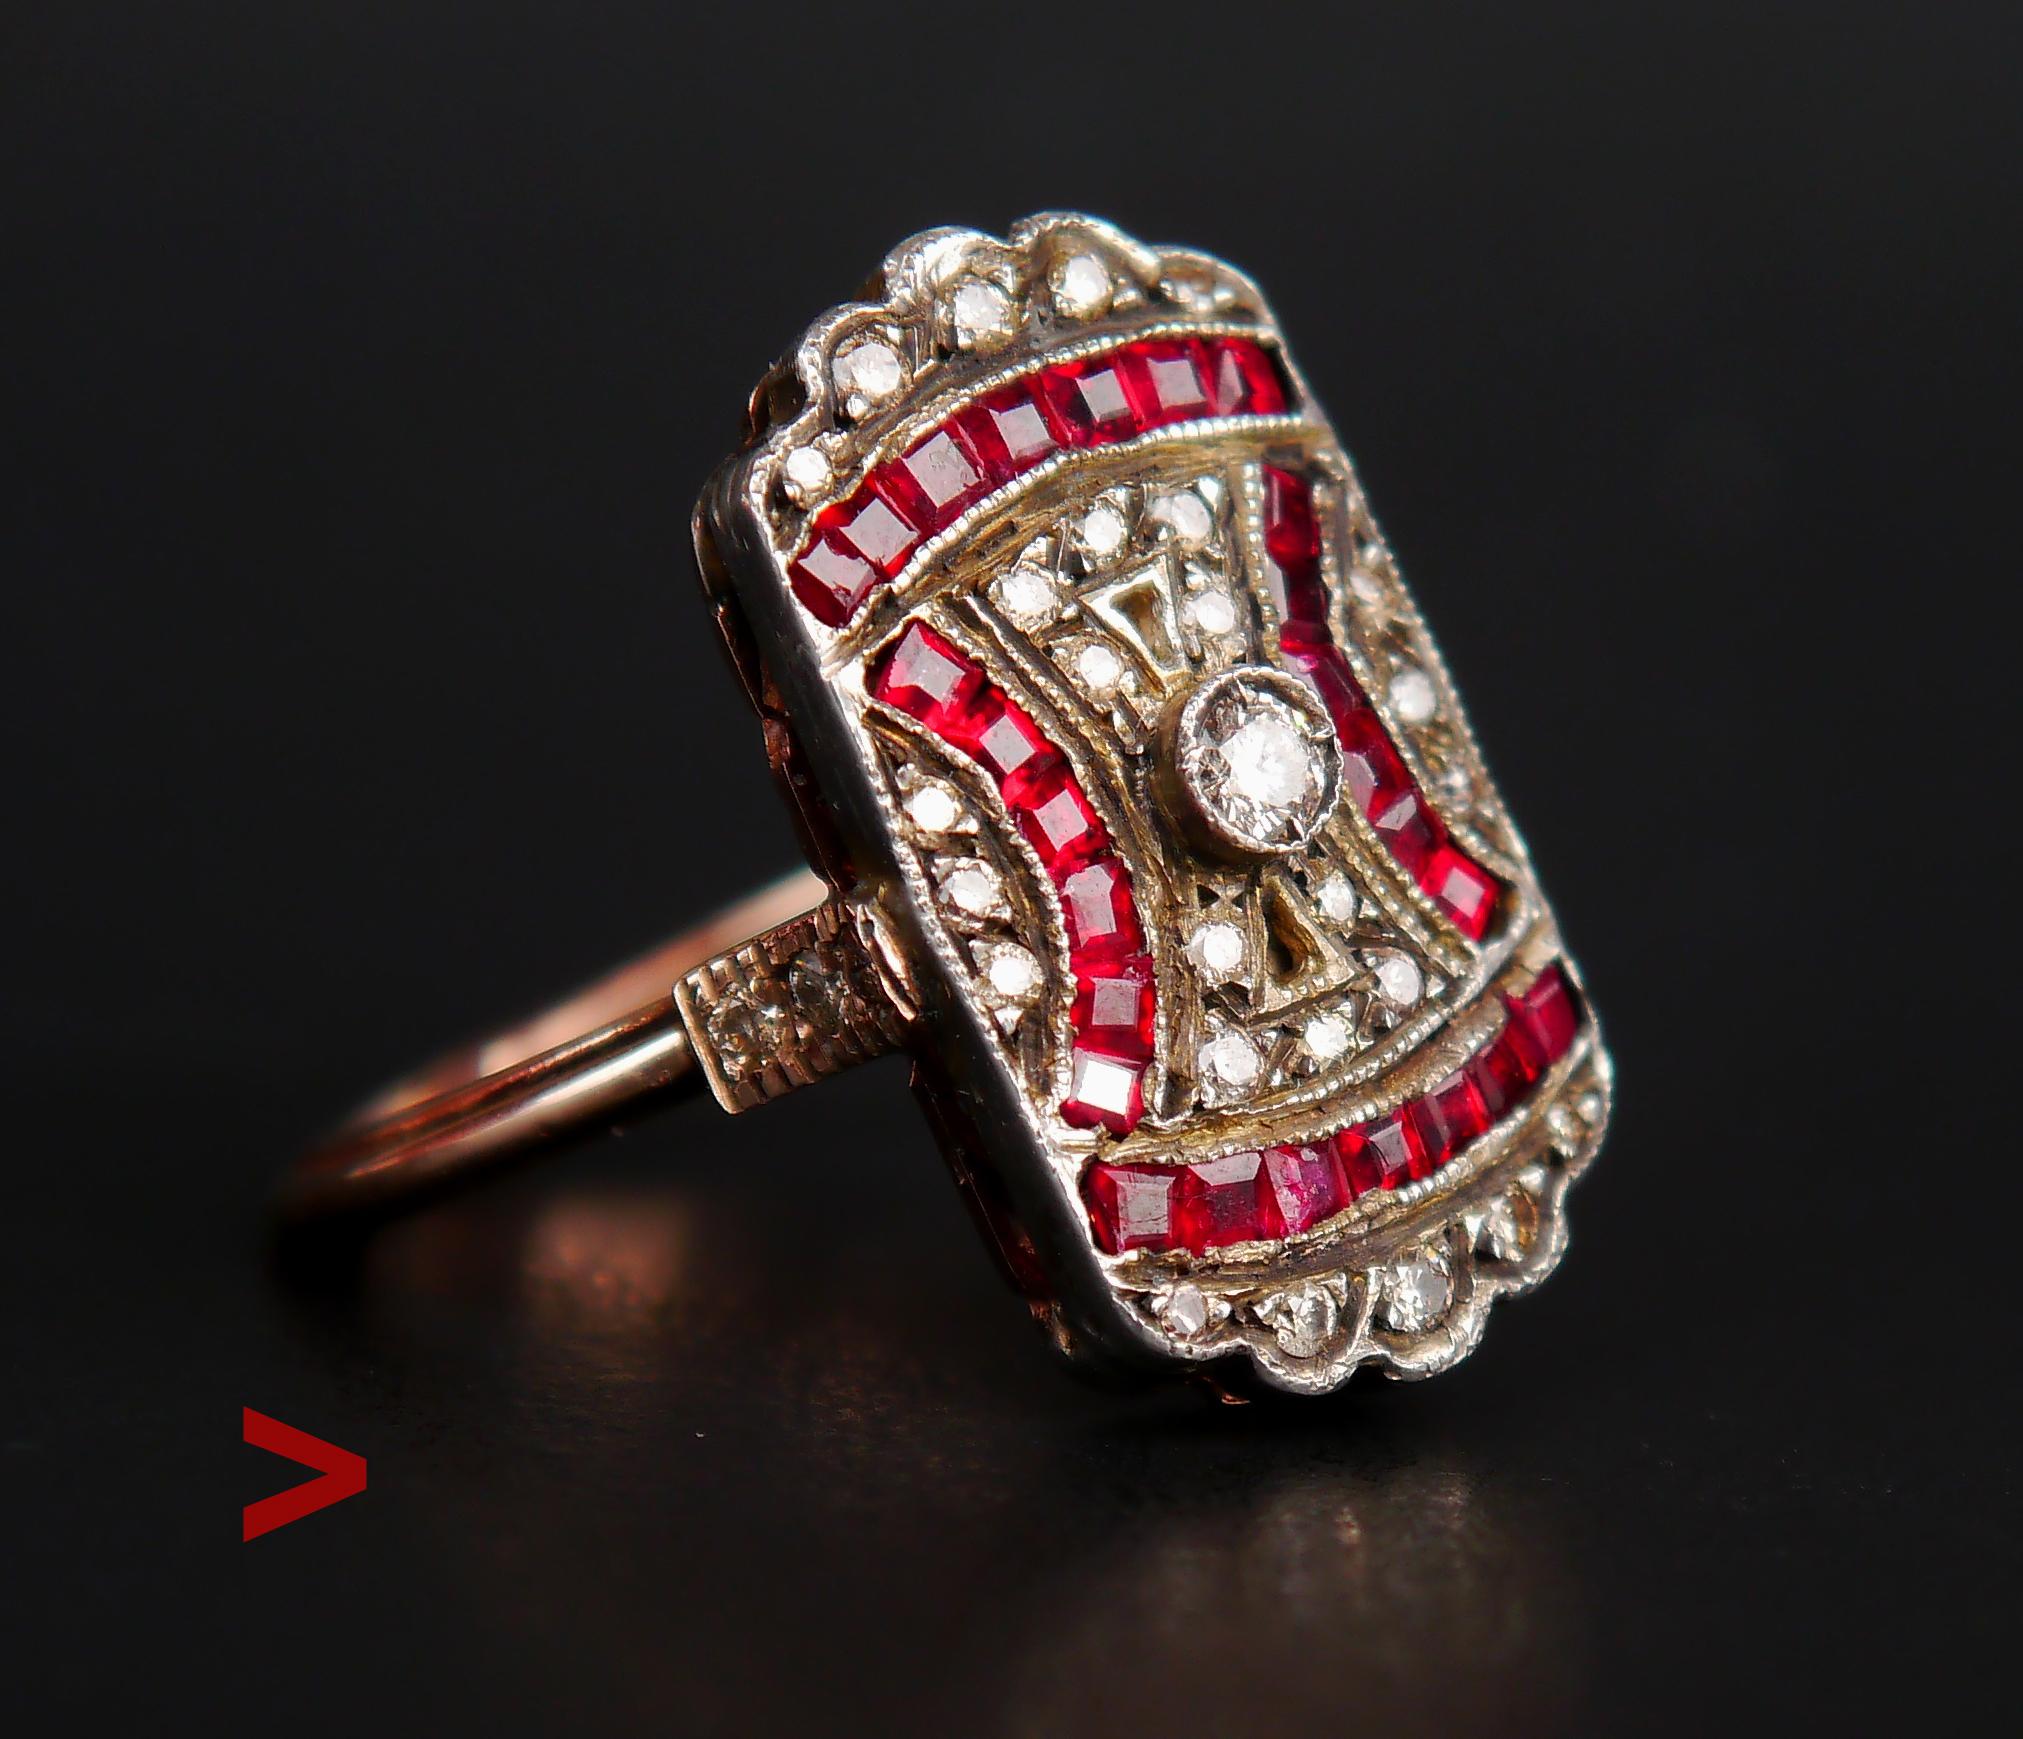 Antique early 1900's fanciest European cluster Ring featuring Silver on solid 14K Rose Gold with Diamonds and Rubies. Presumably German or French made, this ring was a part of 2nd World War trophies of a Red Army officer who fought his way from